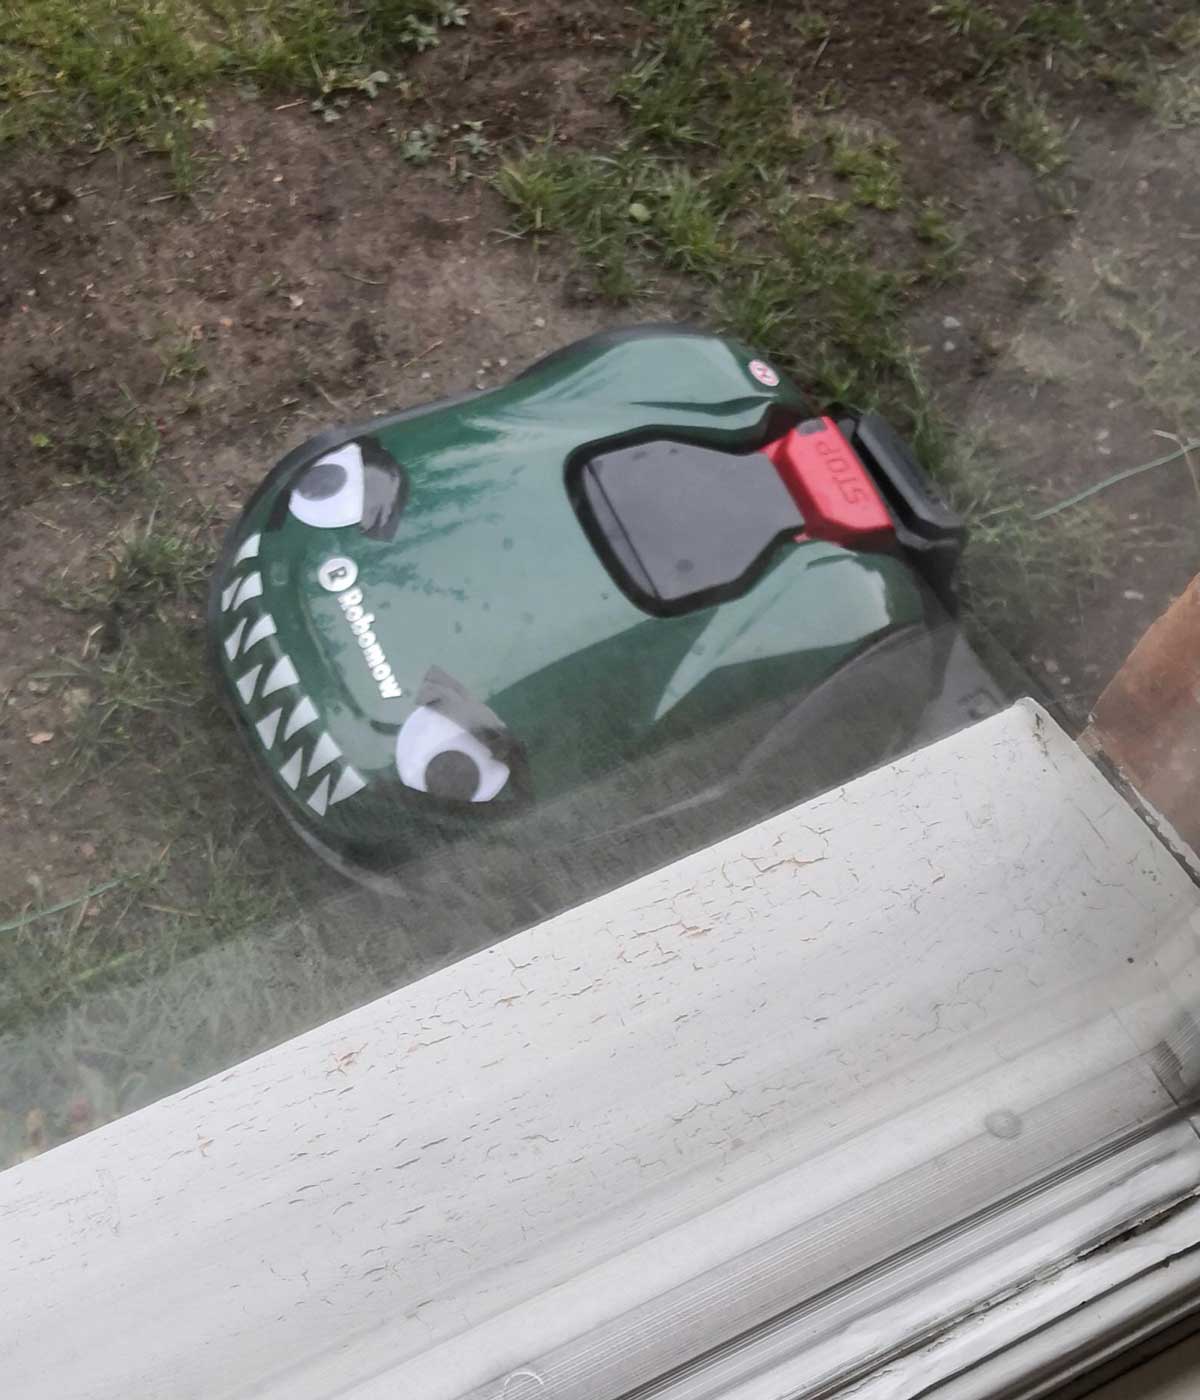 After I hurt my foot mowing the lawn, my wife bought and decorated a robomower